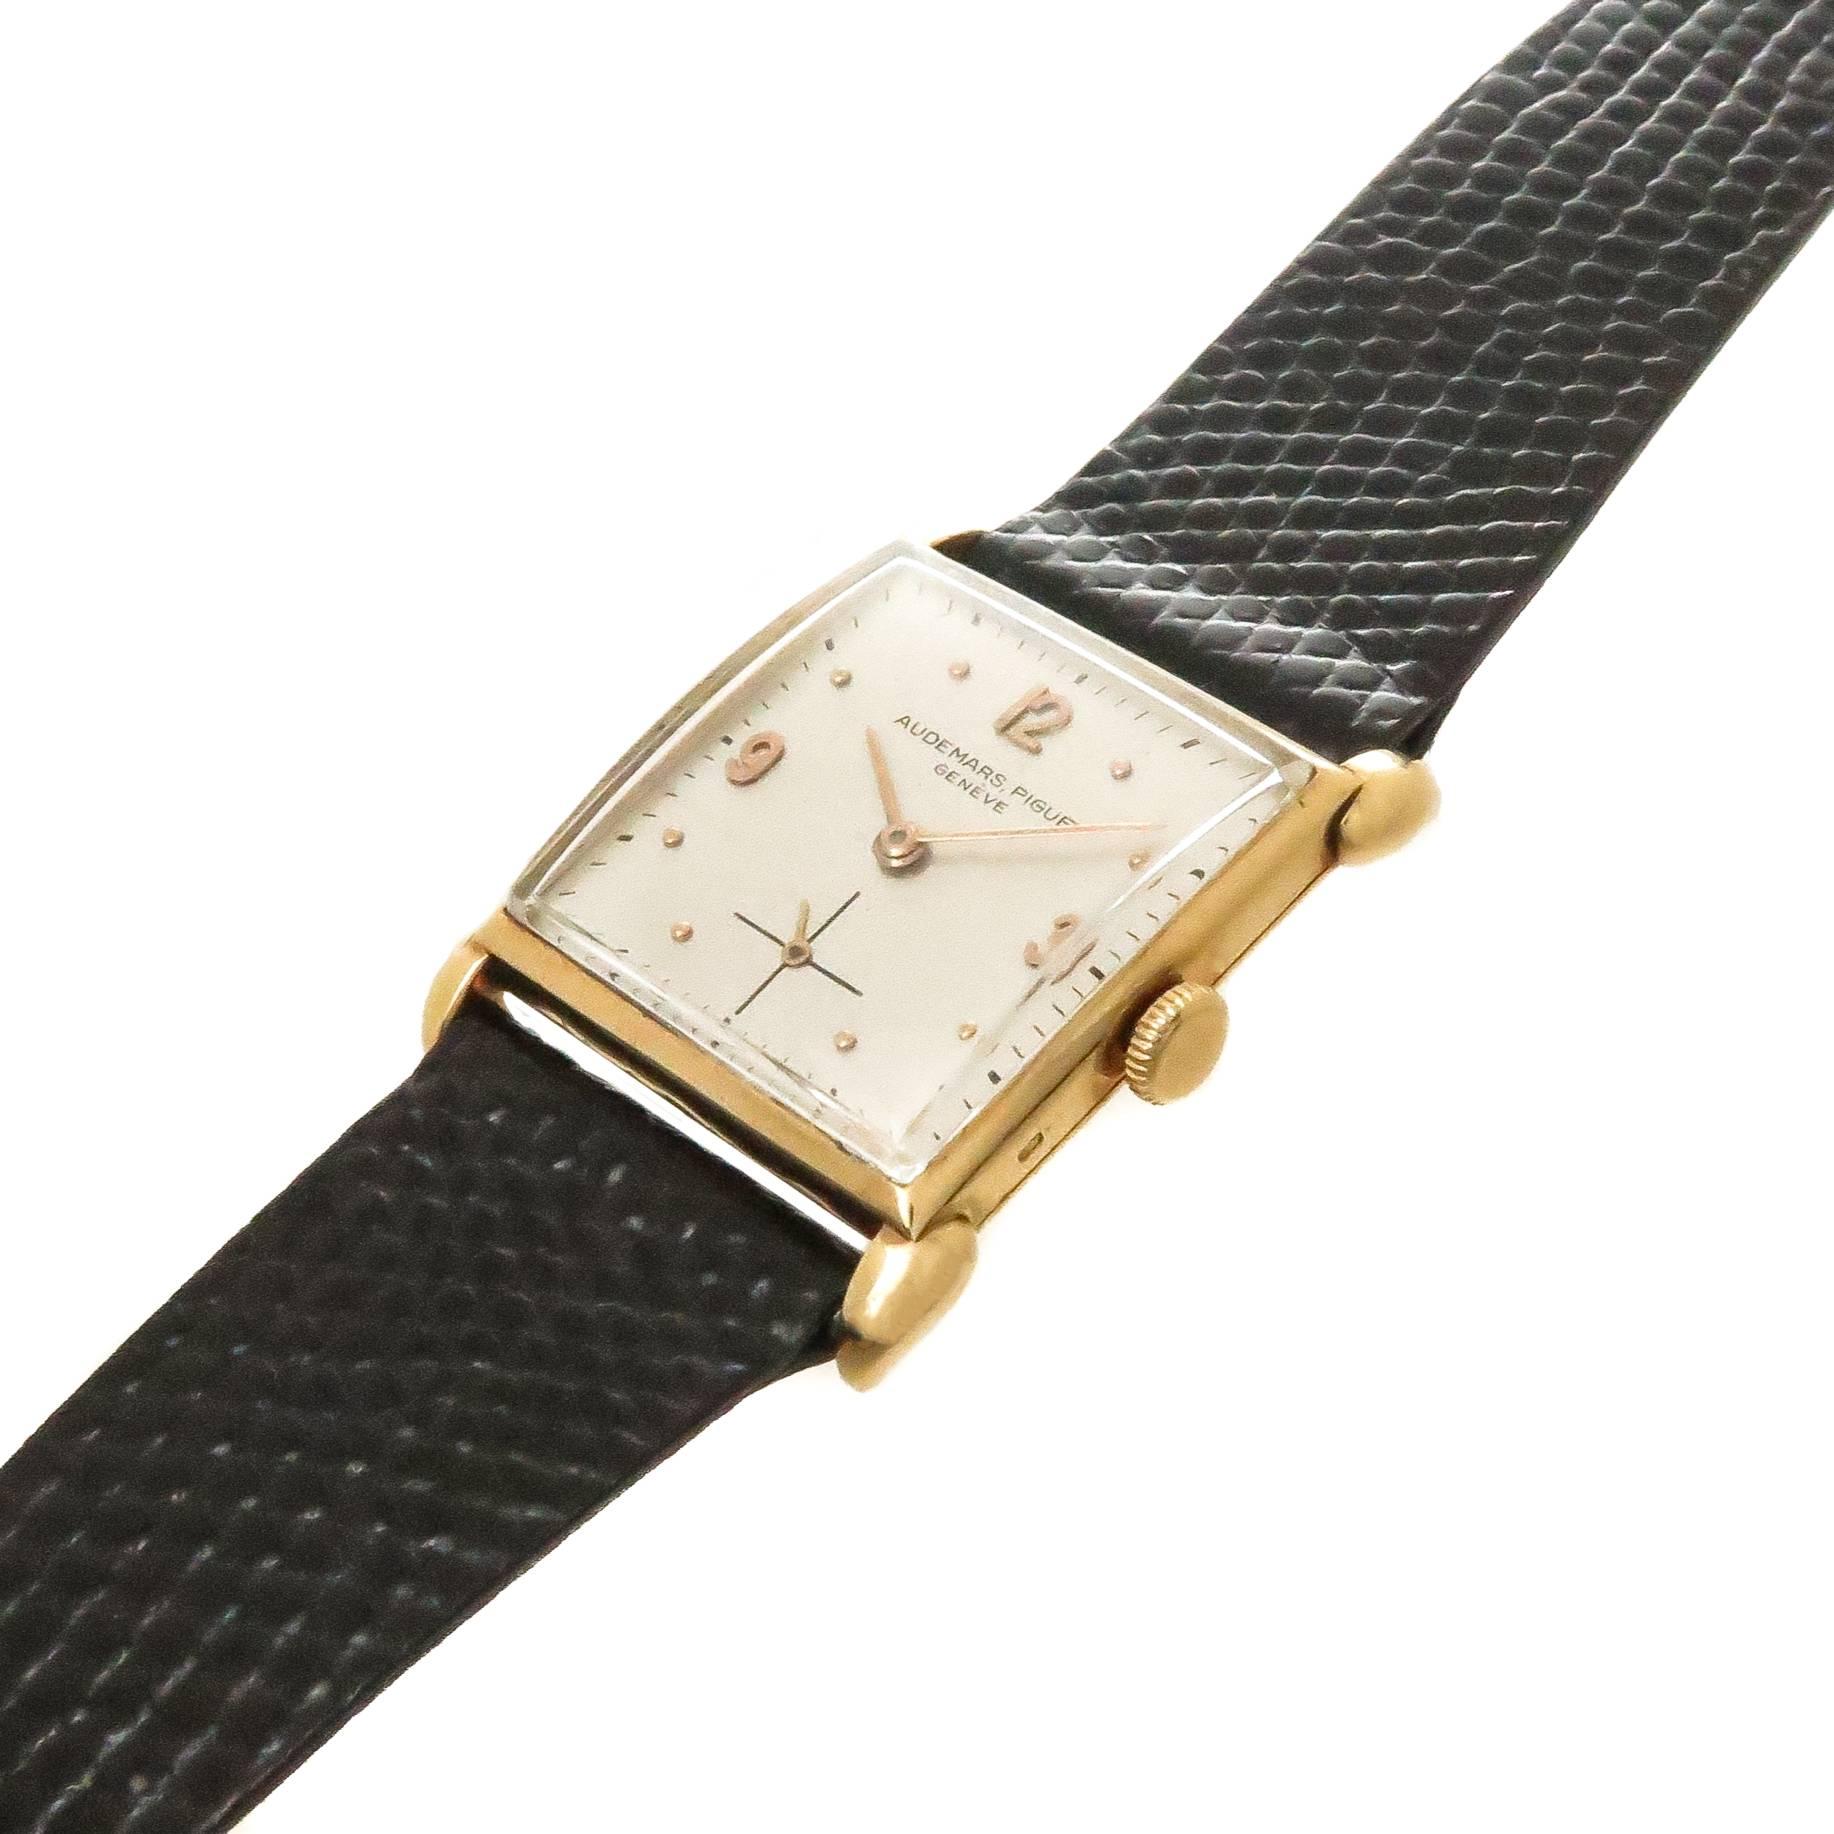 Circa 1940s Audemars Piguet Wrist watch, 33 X 25 MM 18K Yellow Gold Case with Flared lugs. 18 Jewel Mechanical, manual wind movement. Recently restored as original silver dial with Raised gold Markers.  New Black Lizard strap. Watch measures 8 1/4